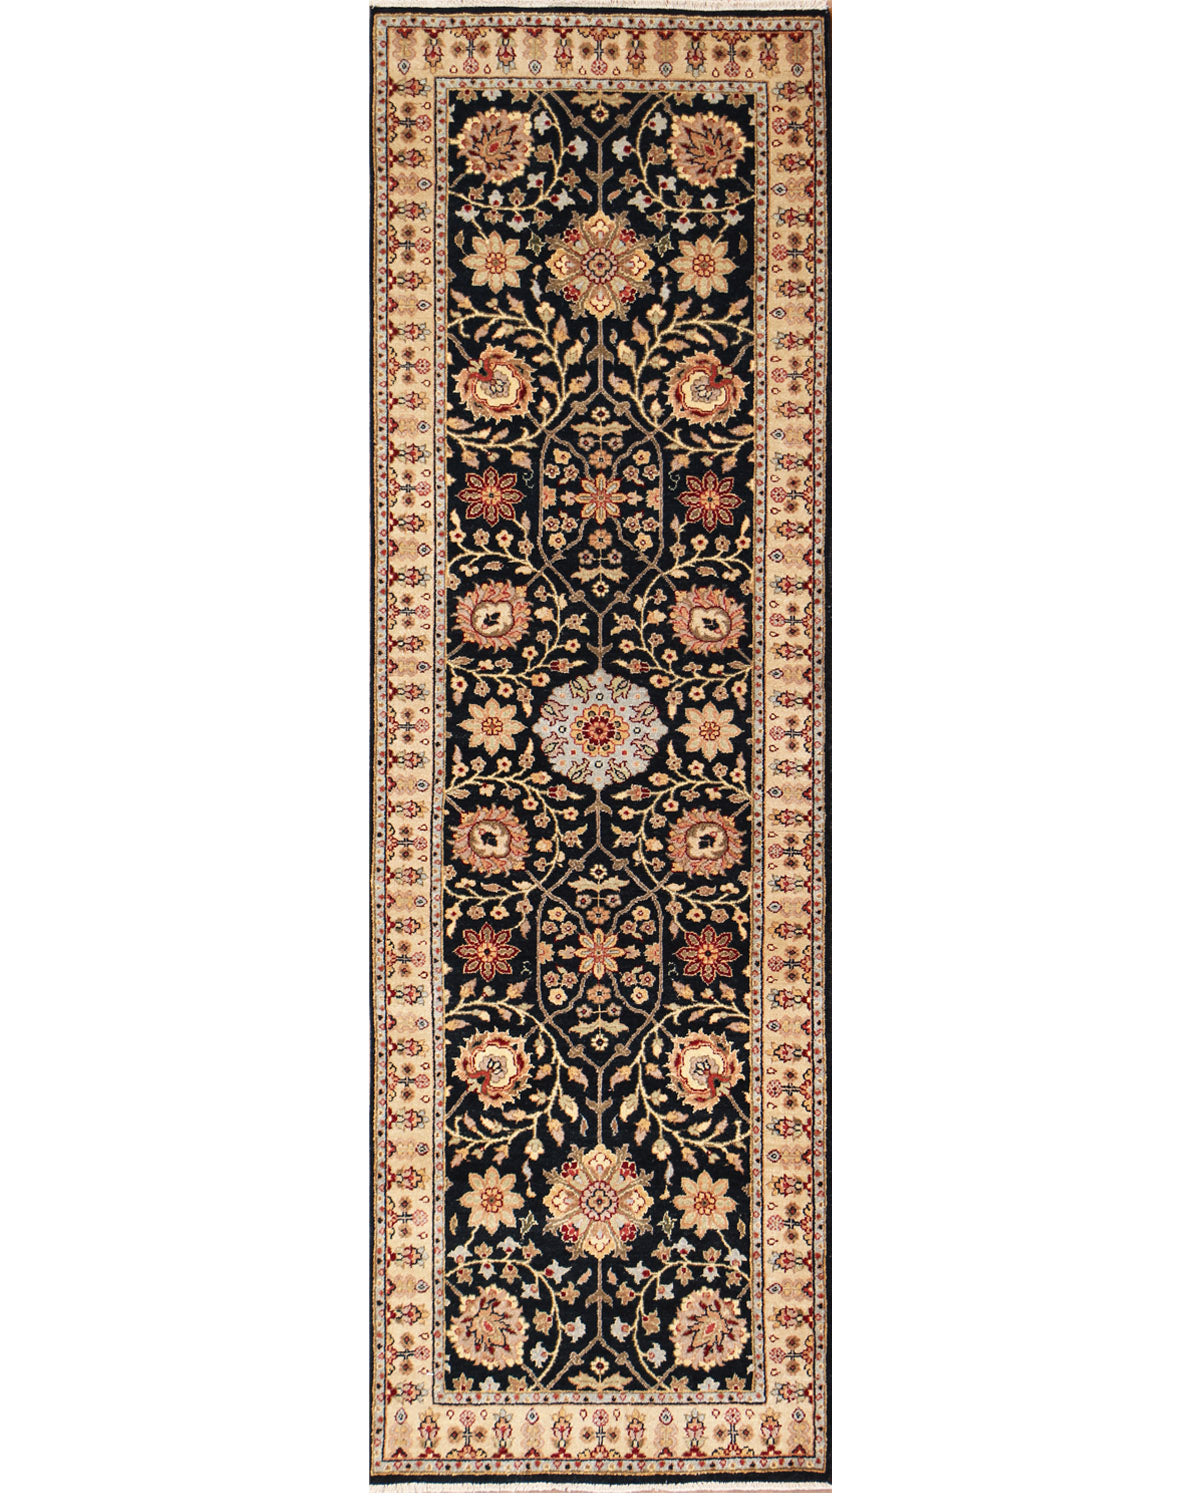 Ellora Indo Persian Black Hand Knotted Runner Rug 2'7